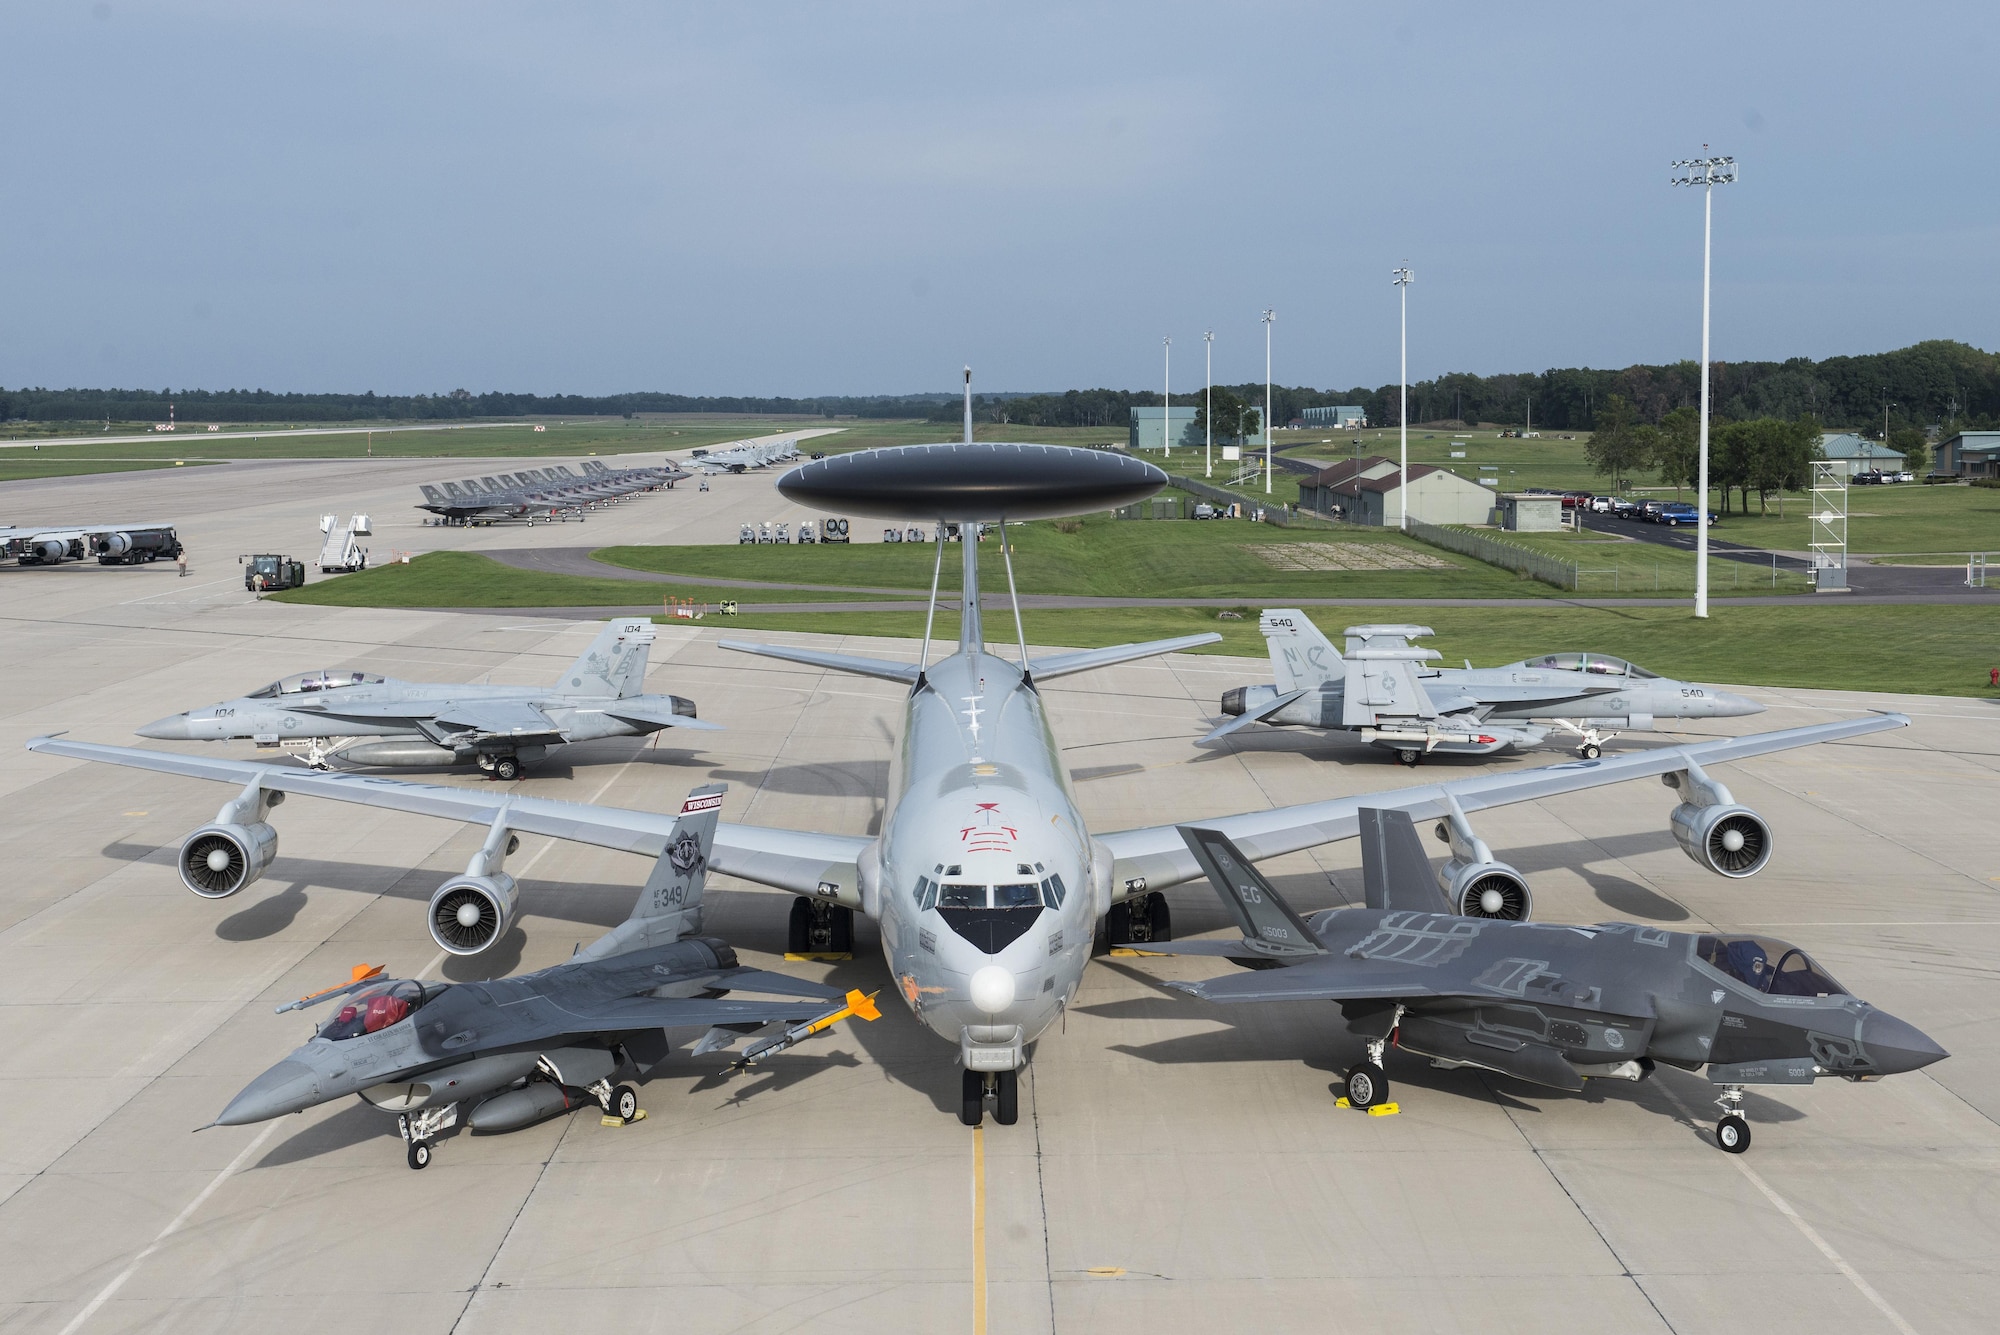 An F-16 Fighting Falcon, E-3 Sentry, F-35A Lightning II, F/A-18 Super Hornet and an EA-18 Growler are set up in a static display Aug. 29, 2016, during Exercise Northern Lightning at Volk Field, Wis. Northern Lightning allowed all five of these aircraft the opportunity integrate and operate in a joint environment while performing counter air, suppression and destruction of enemy air defense and close air support in a contested environment. (U.S. Air Force photo by Senior Airman Stormy Archer)